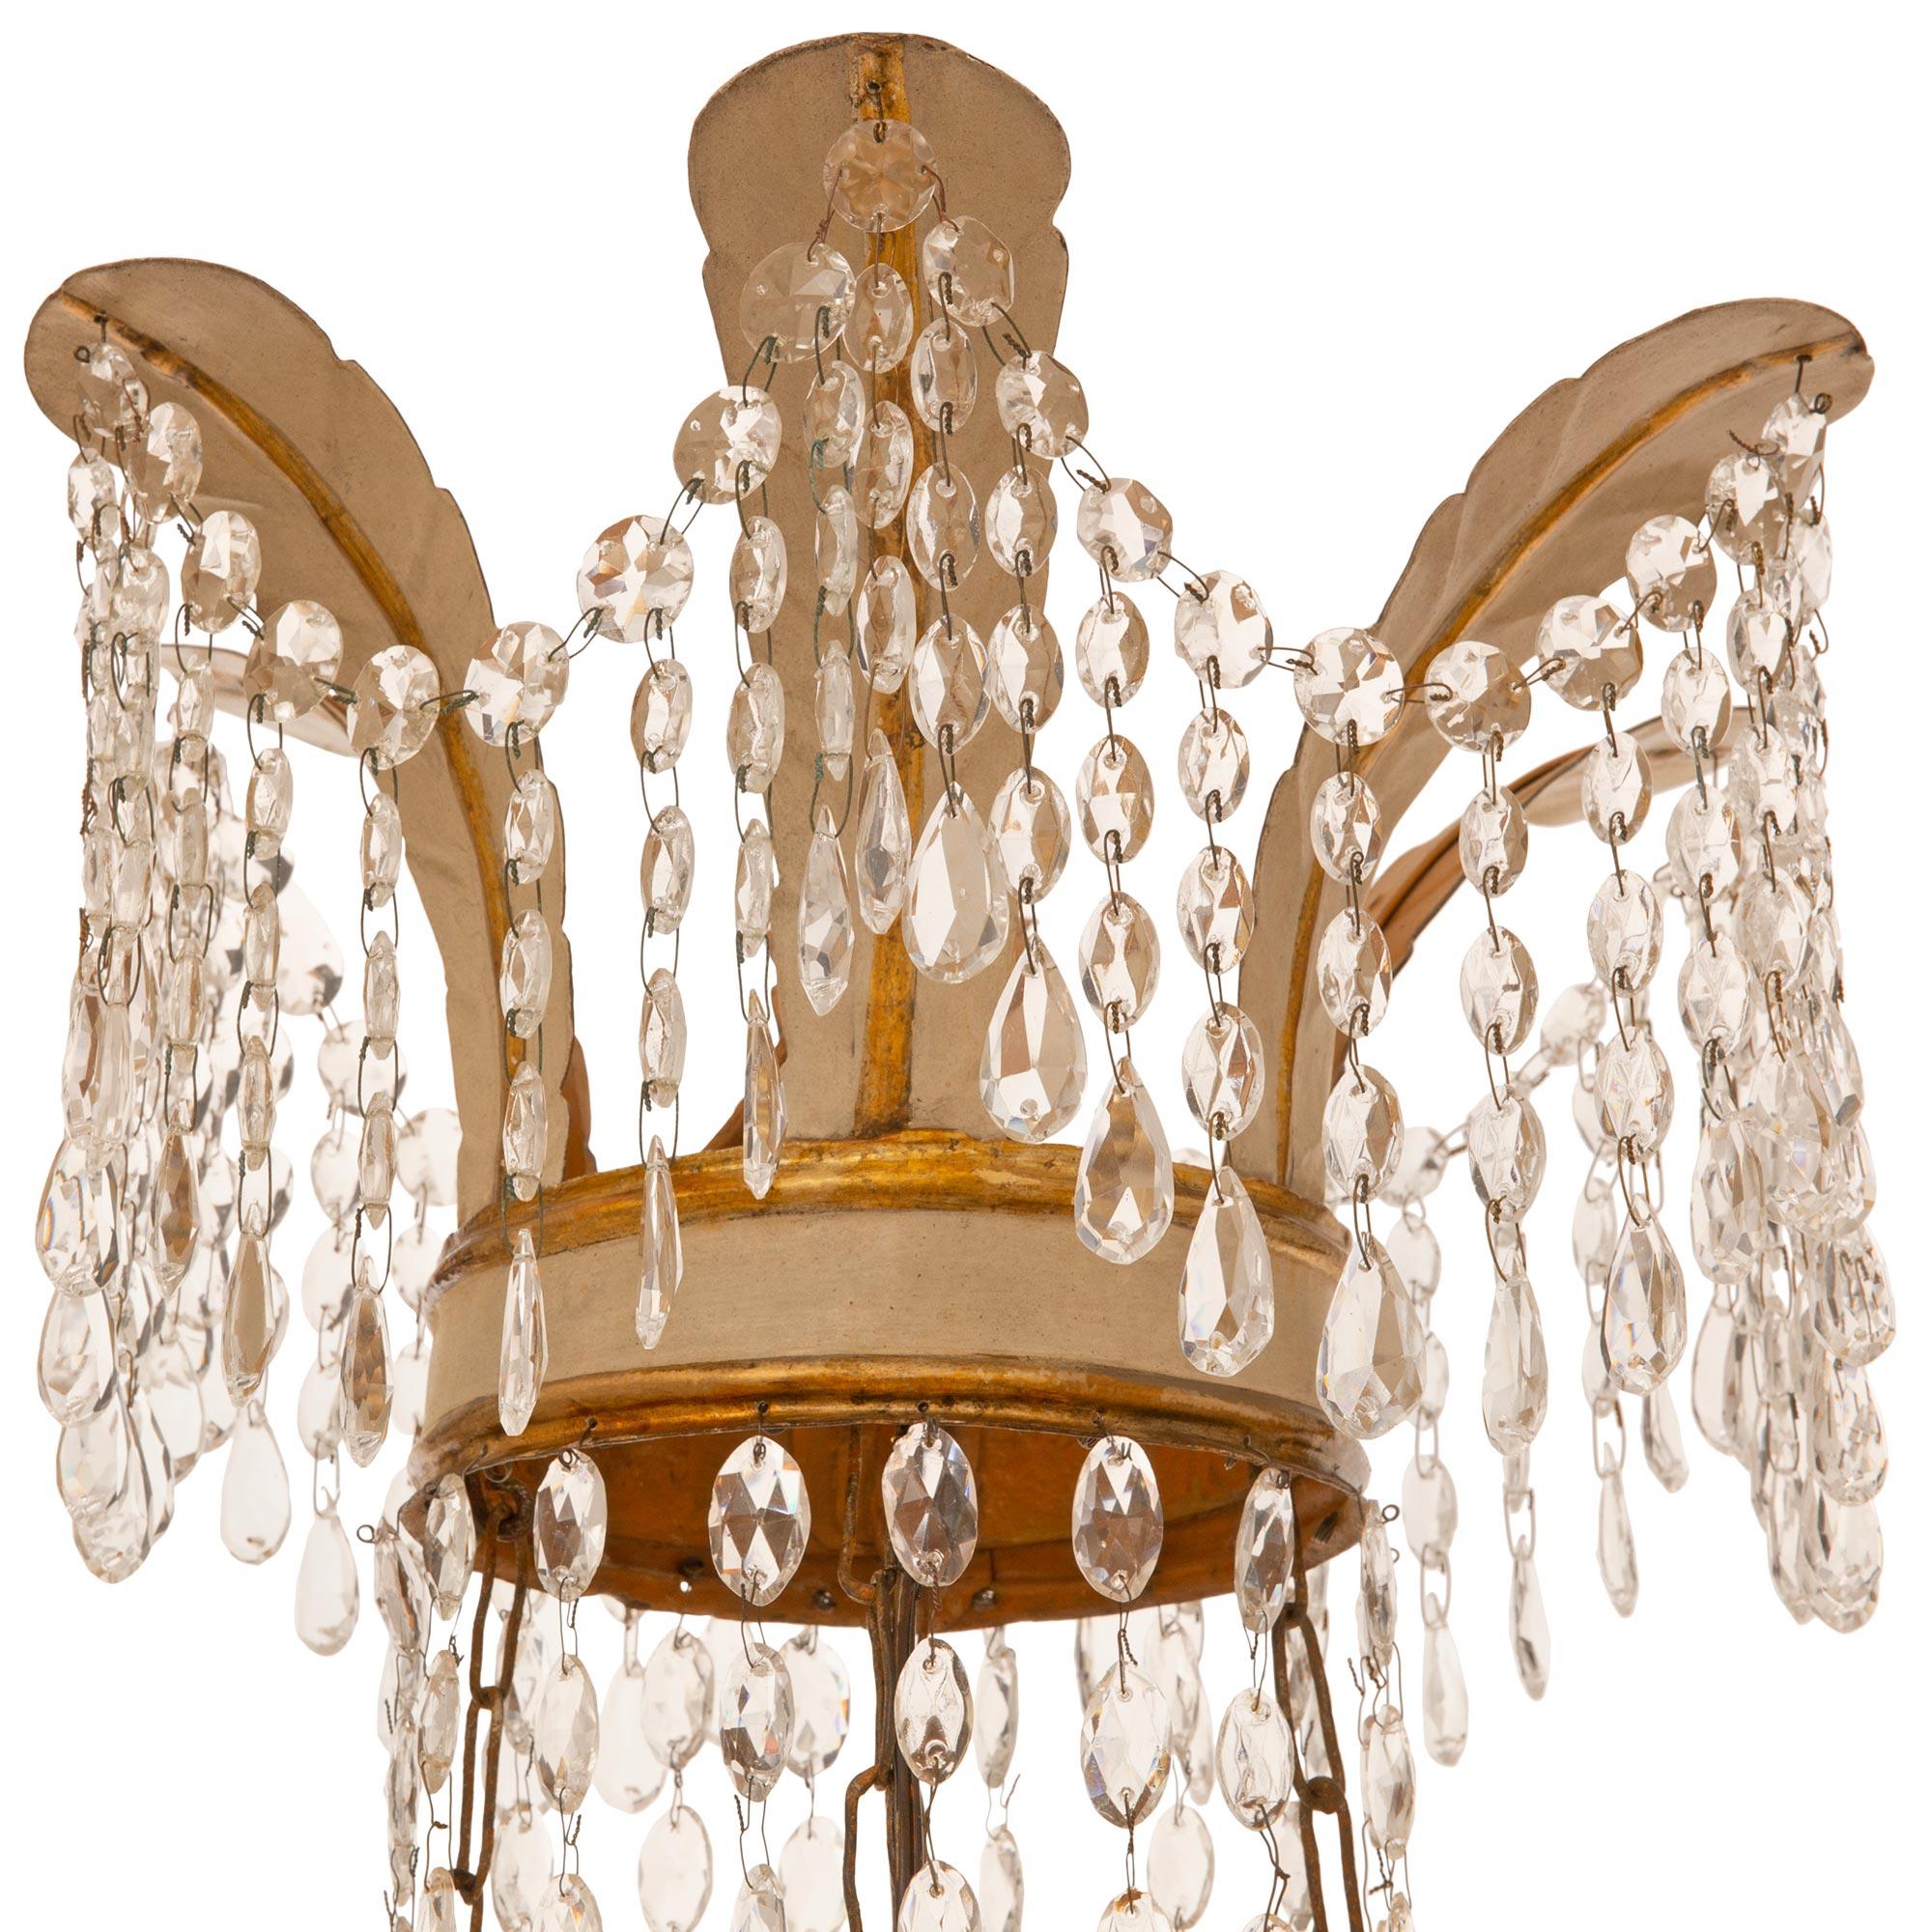 Neoclassical An Italian 18th century Neo-classical st. iron chandelier For Sale